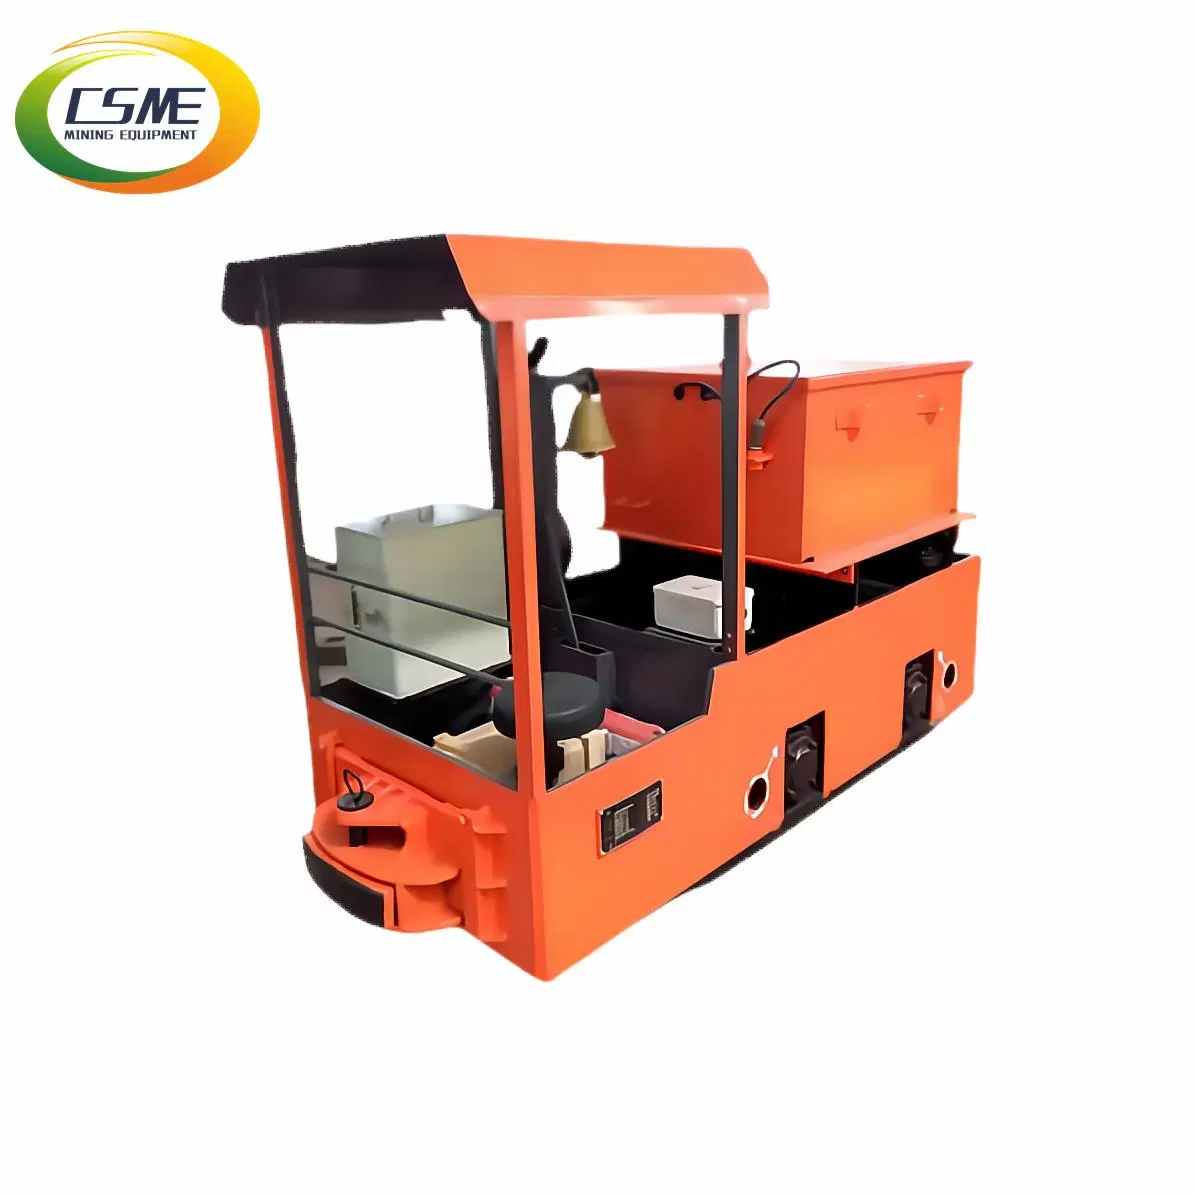 Cty2.5 Battery Electric Locomotive for Underground Mining